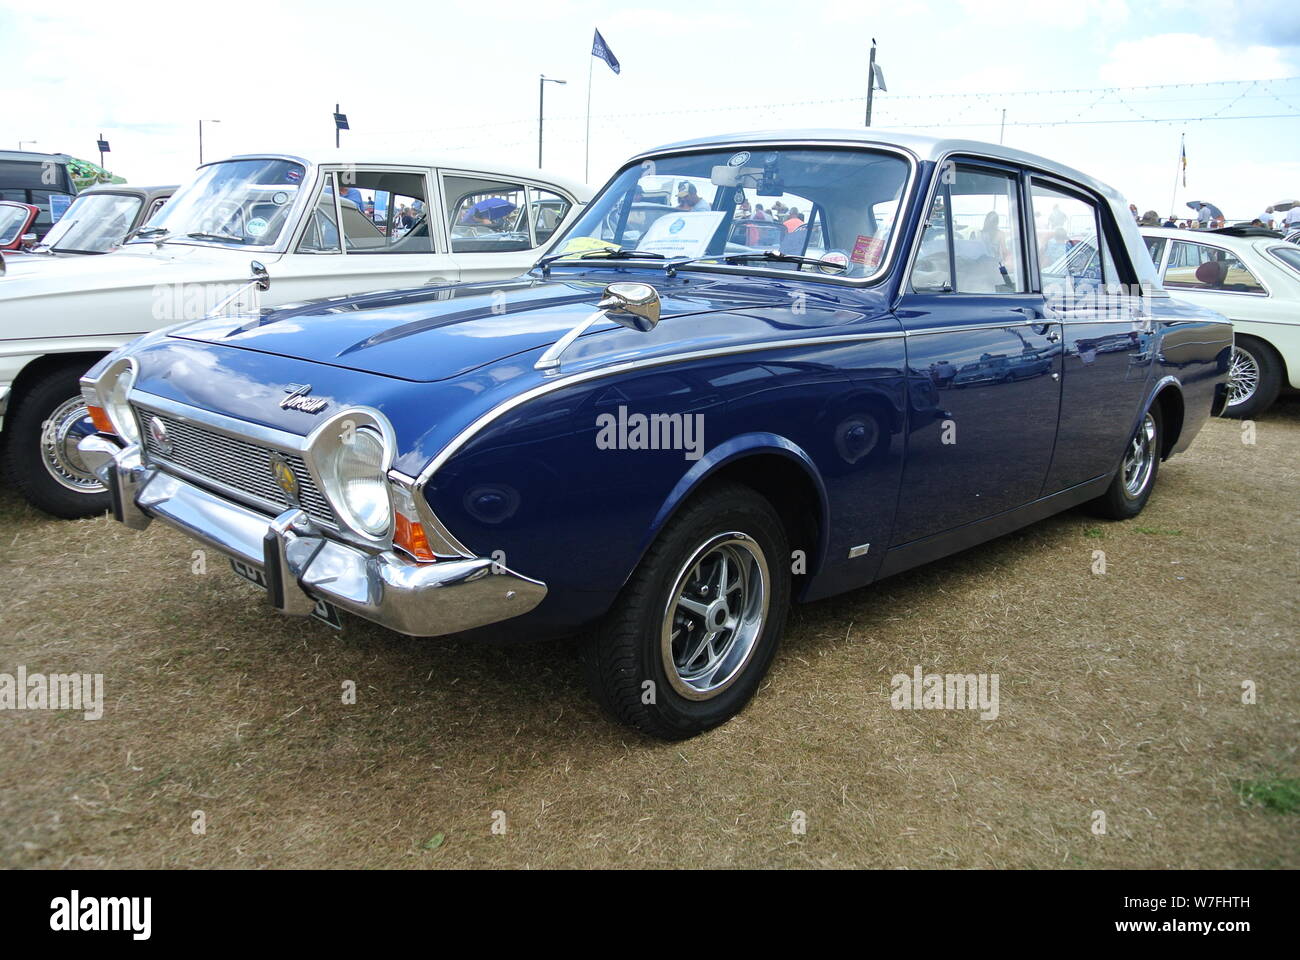 A 1964 Ford Corsair parked up on display at the English Riviera classic car  show, Paignton, Devon, England. UK Stock Photo - Alamy